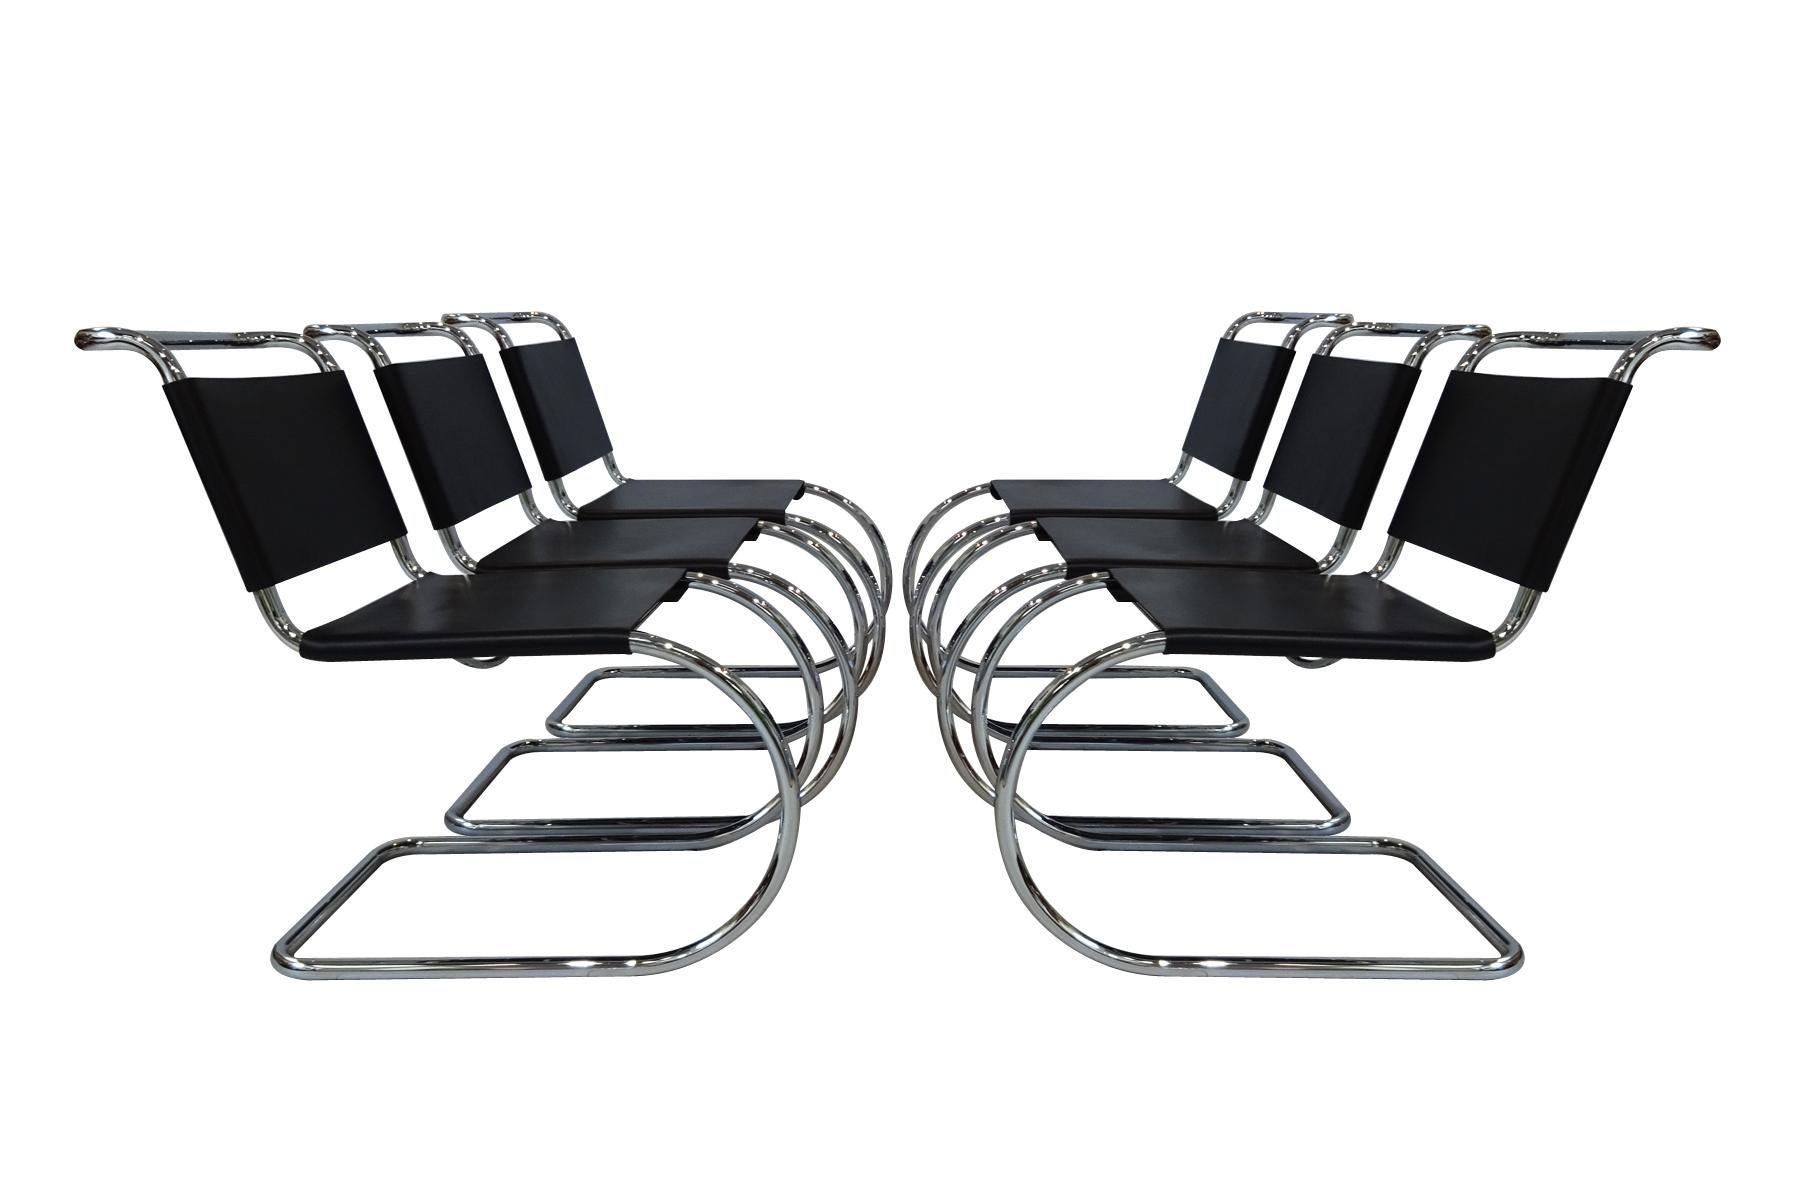 A superb set of 6 black leather and chrome lace back Mies van der Rohe MR10 cantilever chairs produced by Knoll International.

 

These chairs are a design icon being one of the very first cantilever design chairs ever designed by van der Rohe.